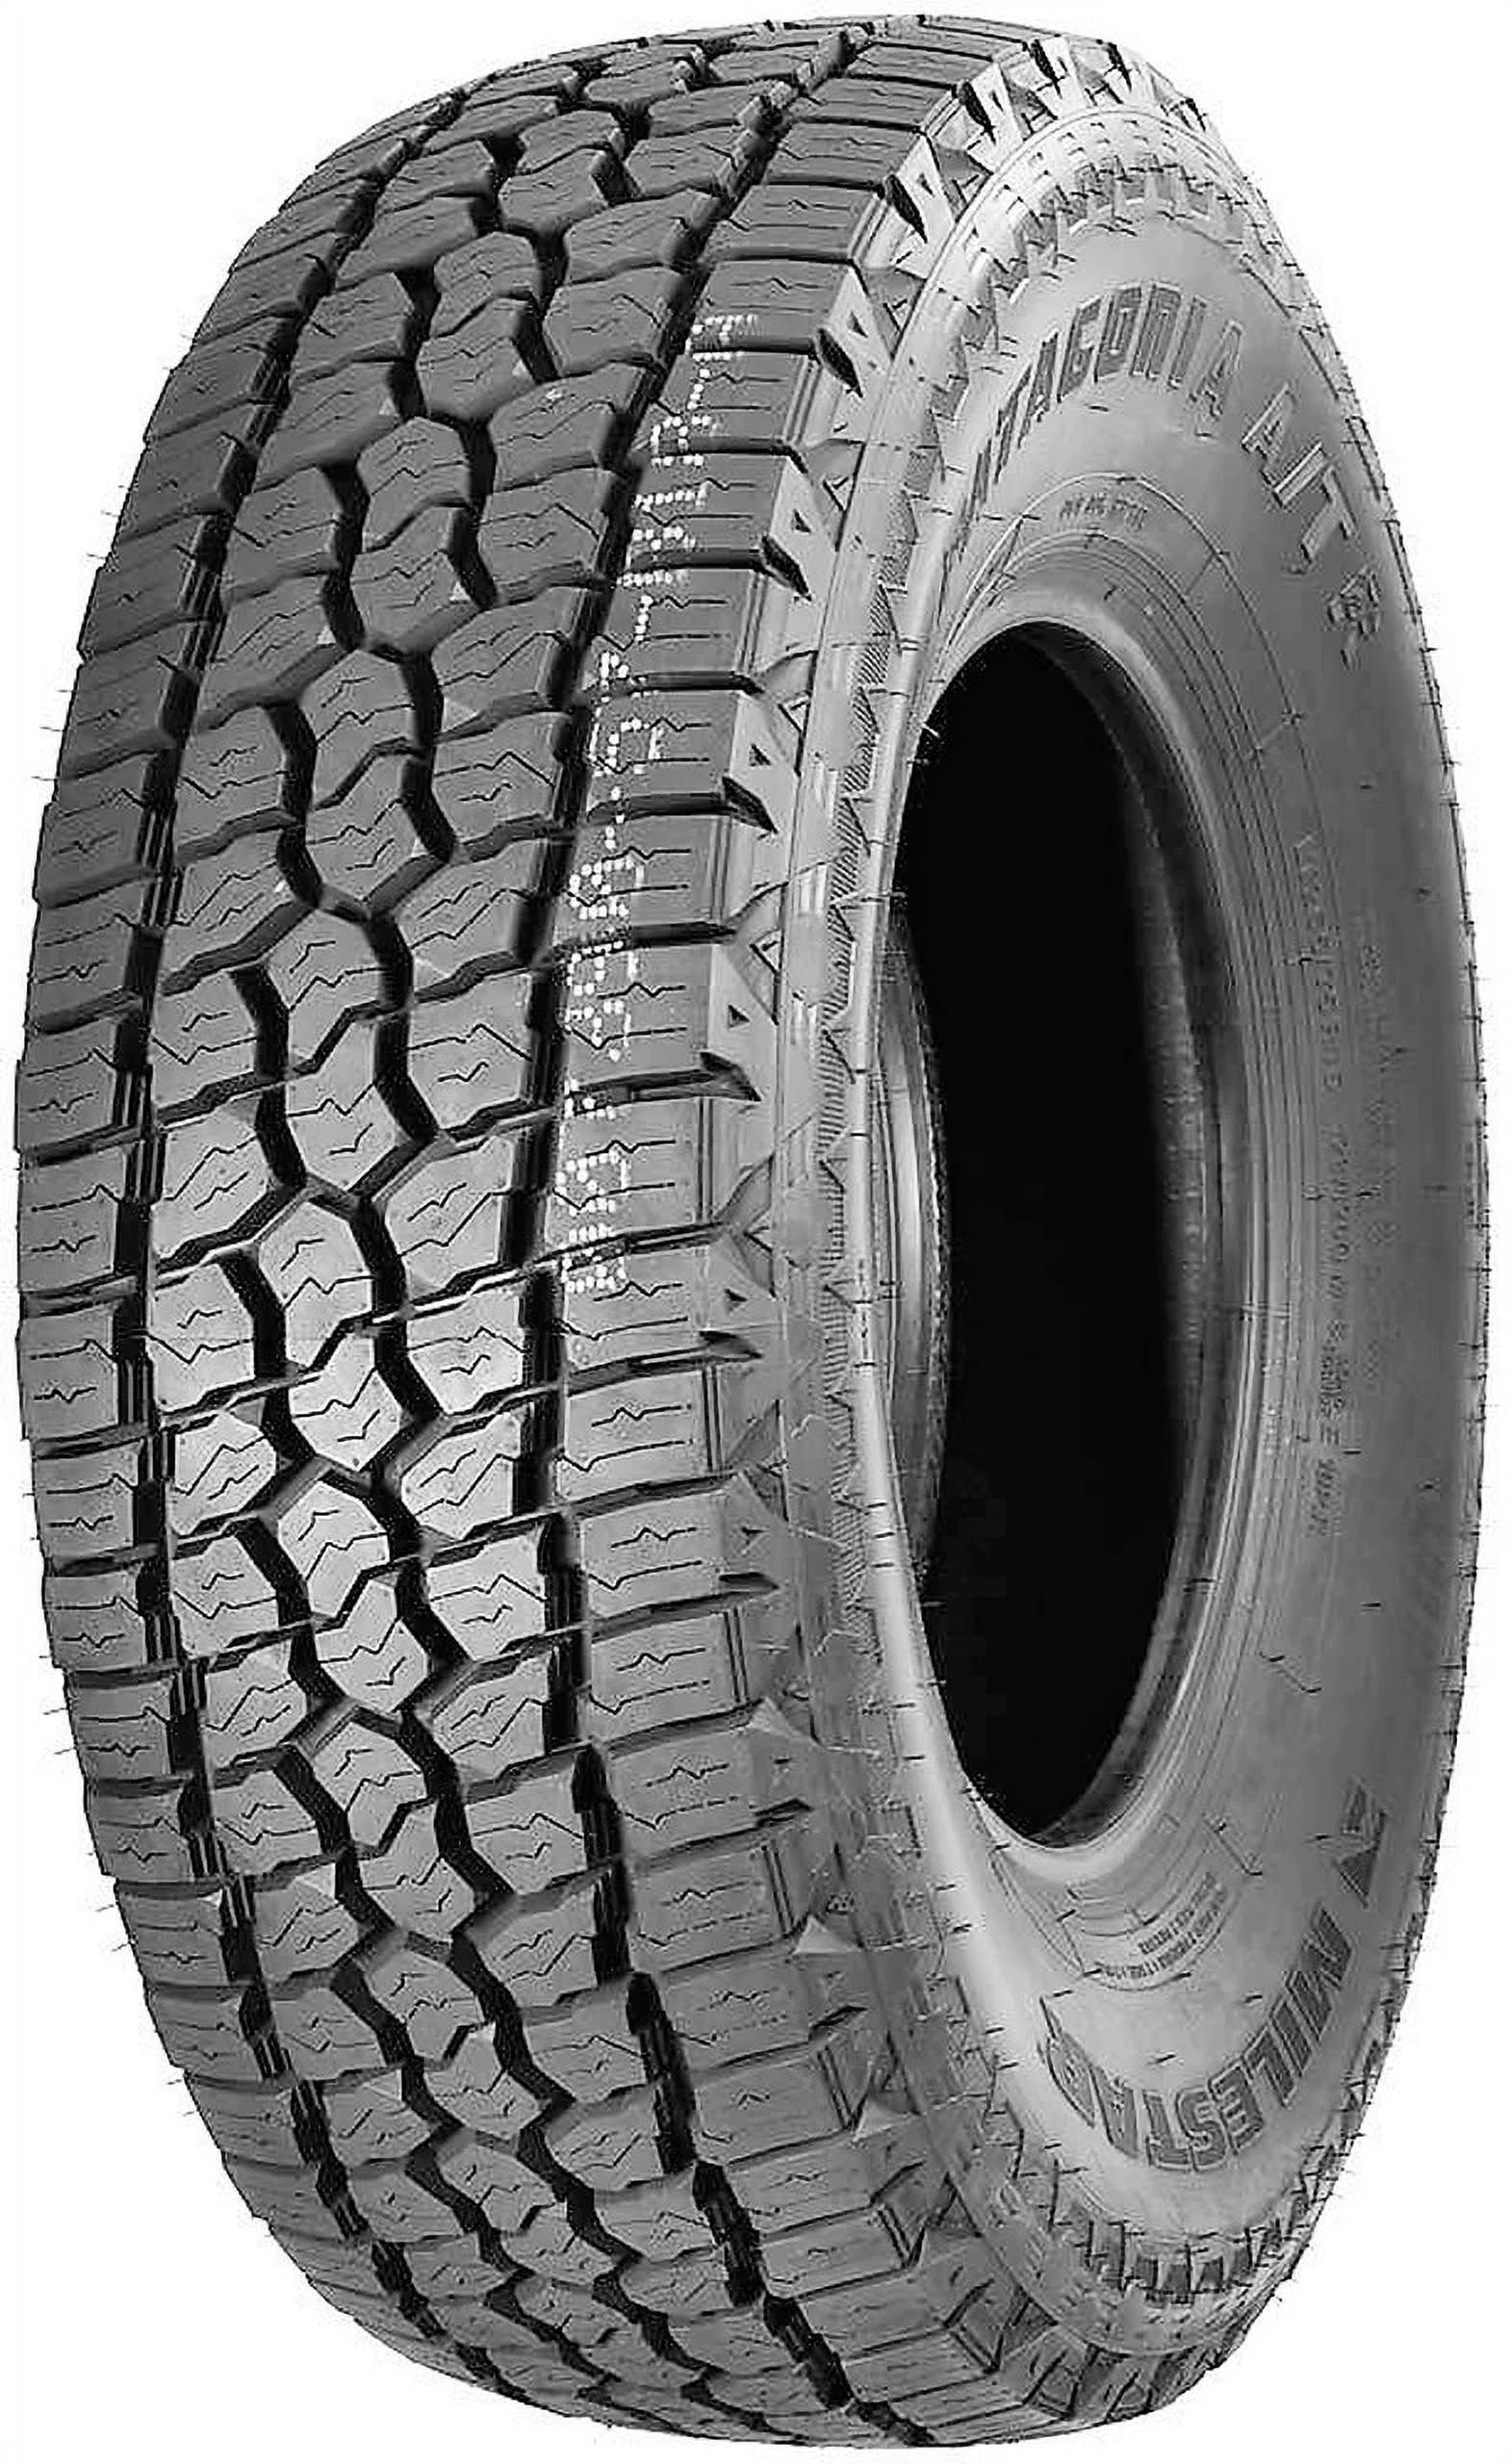 Milestar Patagonia A/T R 265/75-16 116 T Tire - image 1 of 1